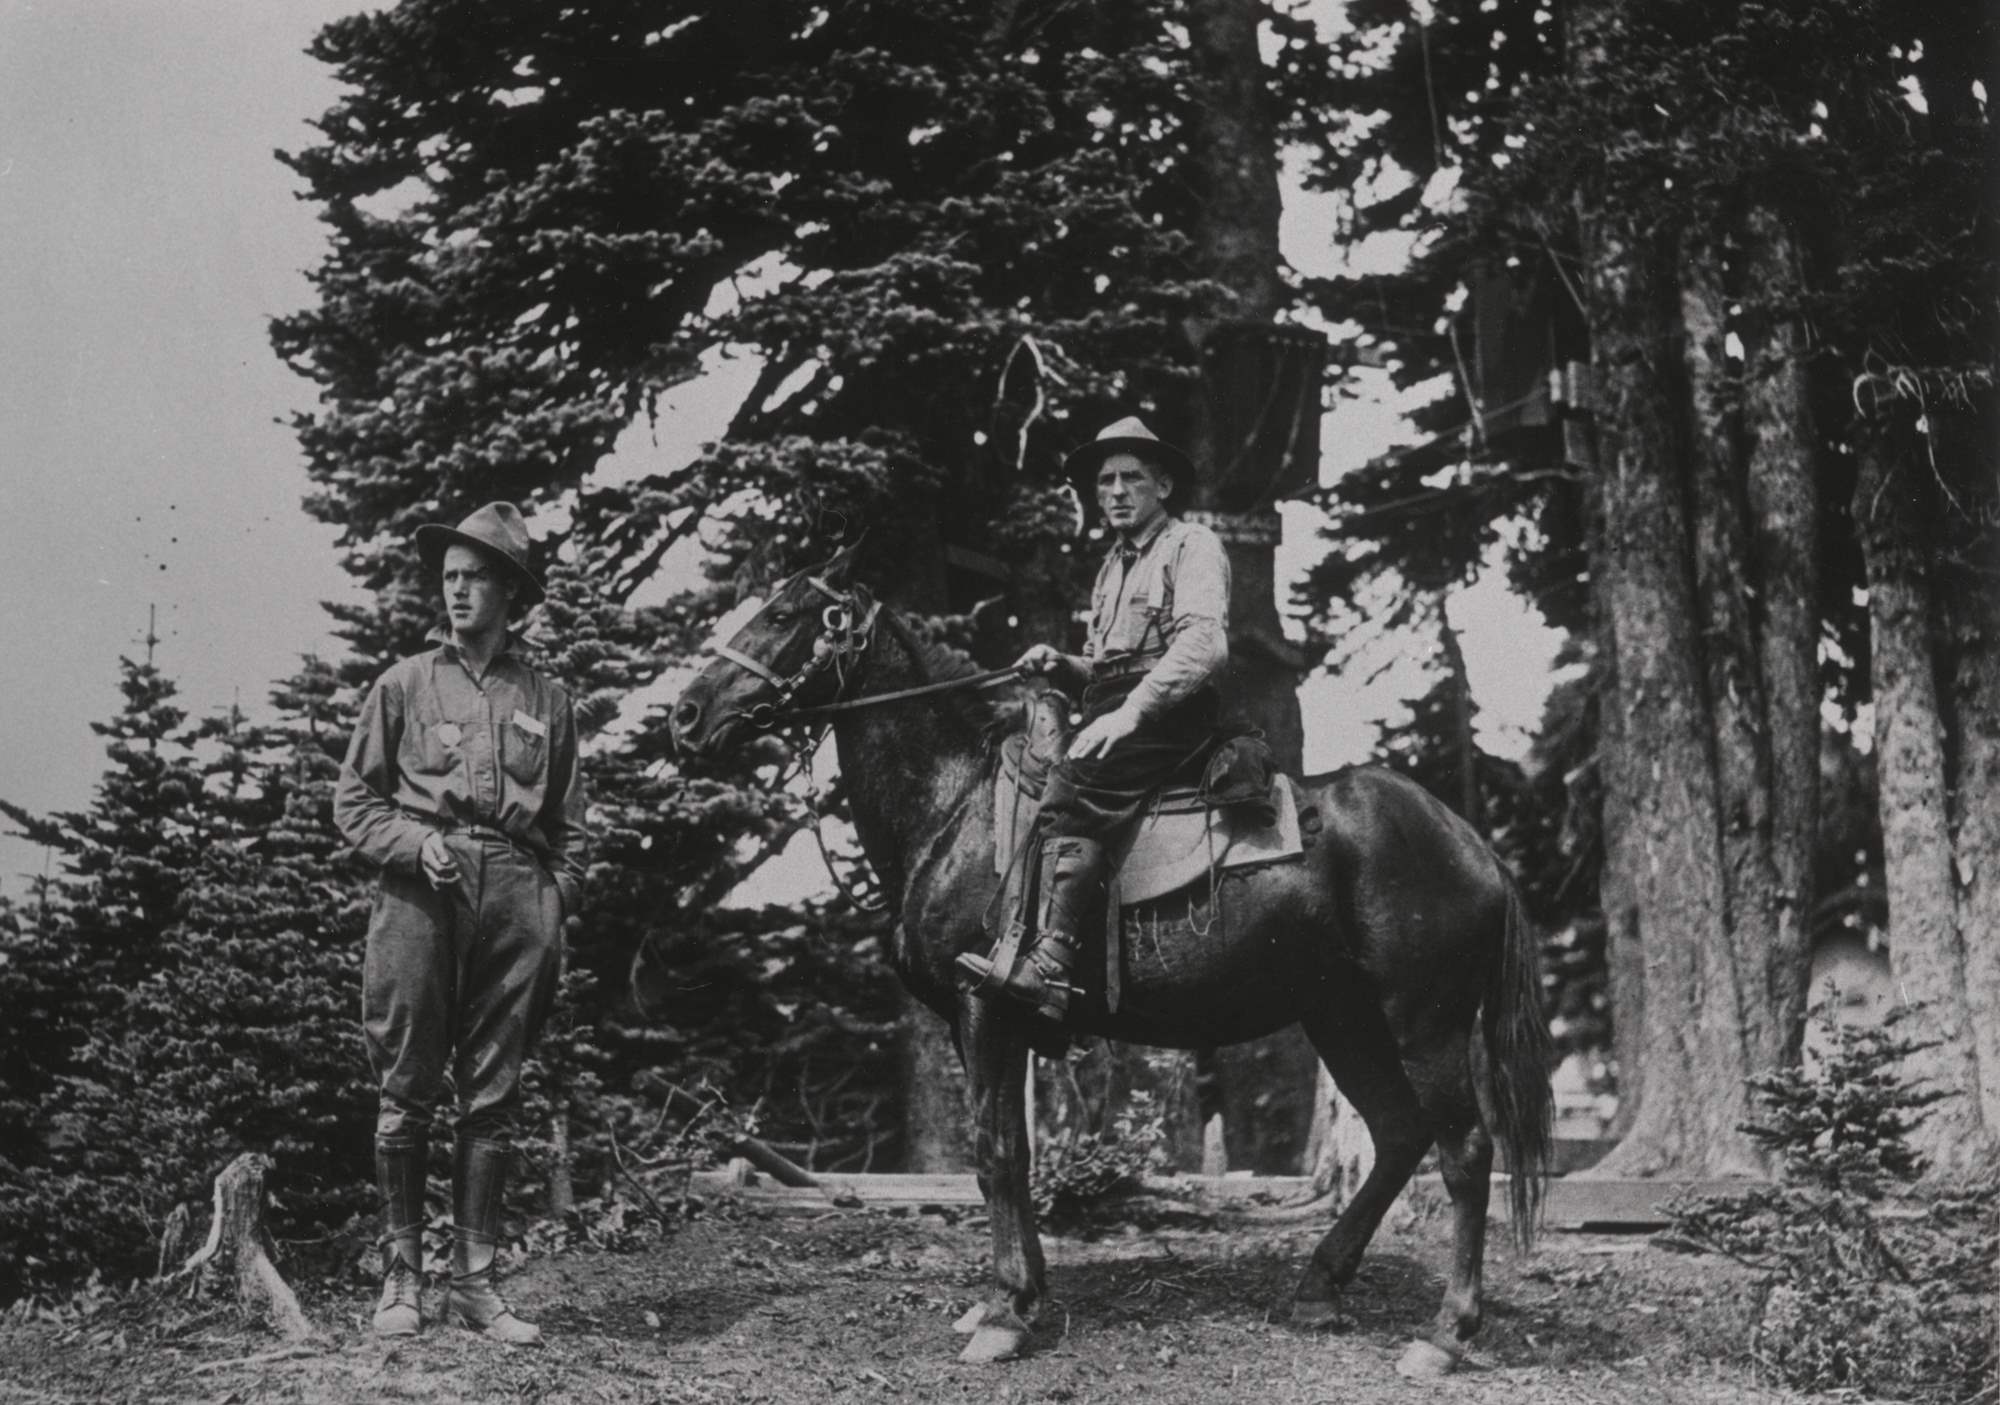 A man stands by another on horseback. Both wear breeches, boots, shirts, and flat brim hats. One has a round badge on his shirt.